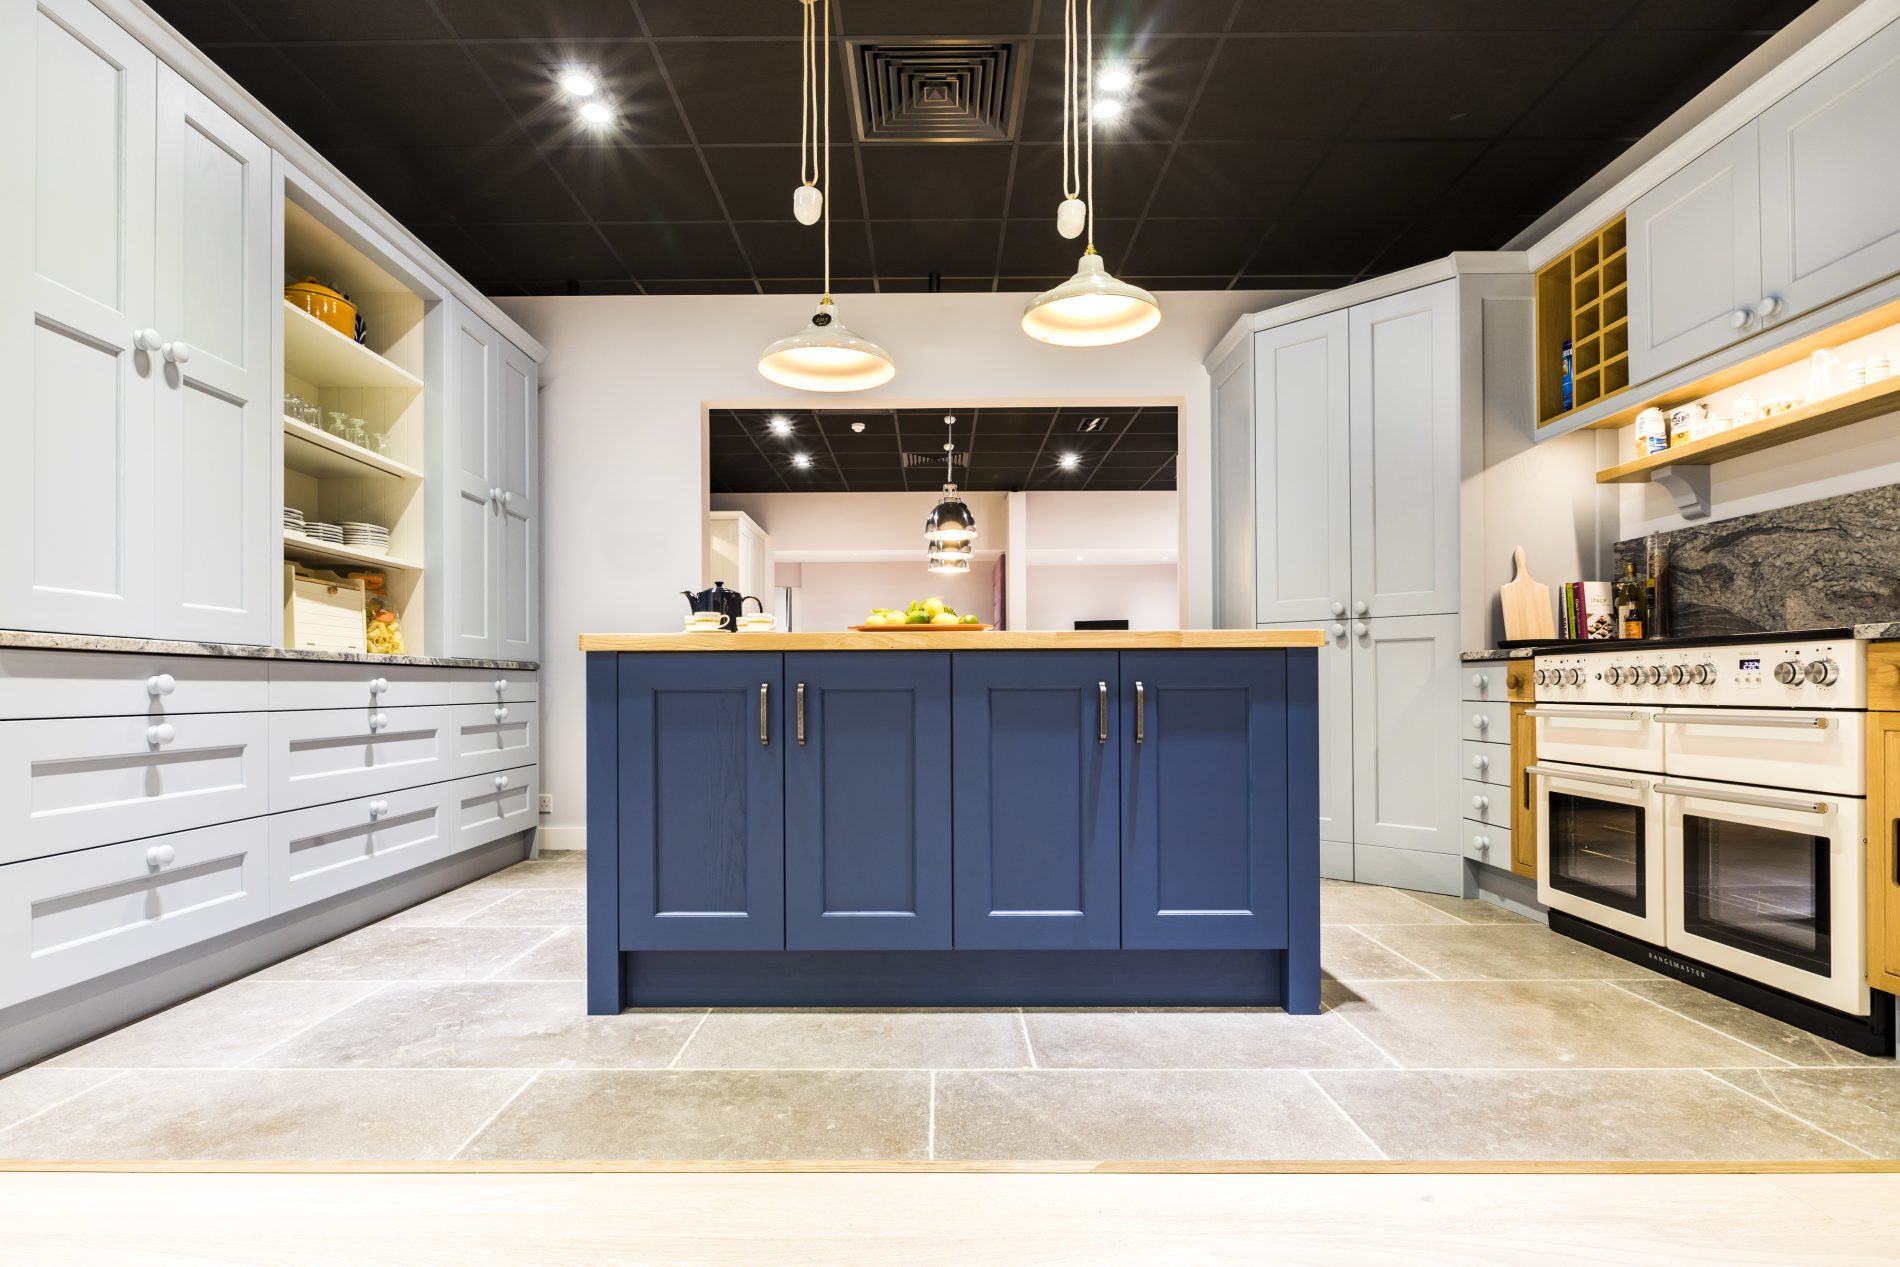 Panoramic shot of our kitchen showroom featuring our pantry blue kitchen, range oven, pendant lighting and limestone tiled flooring